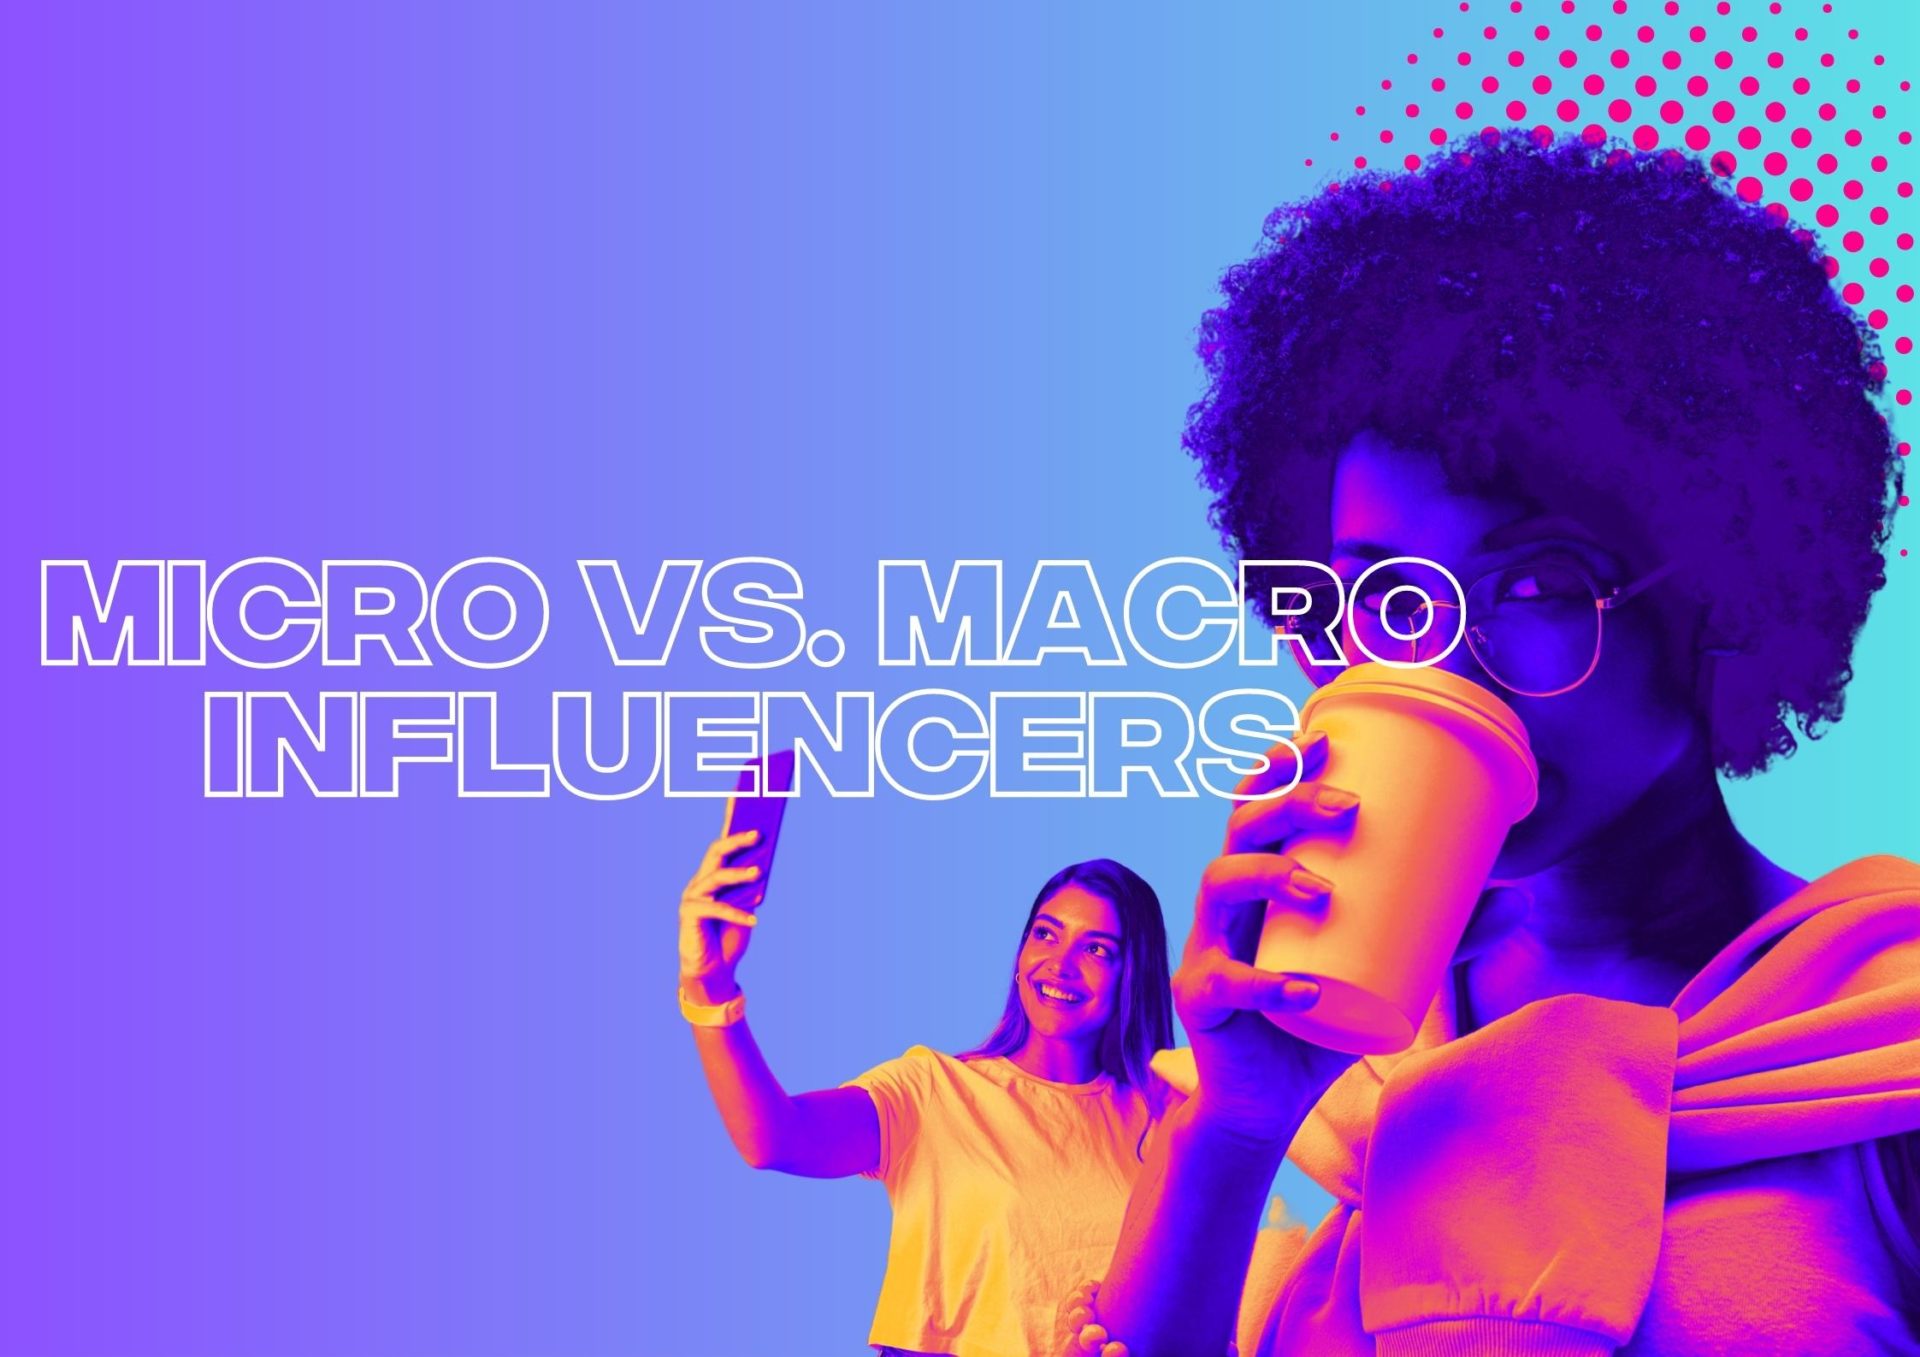 Micro Vs. Macro Influencers: Who Is Better For Your Business?